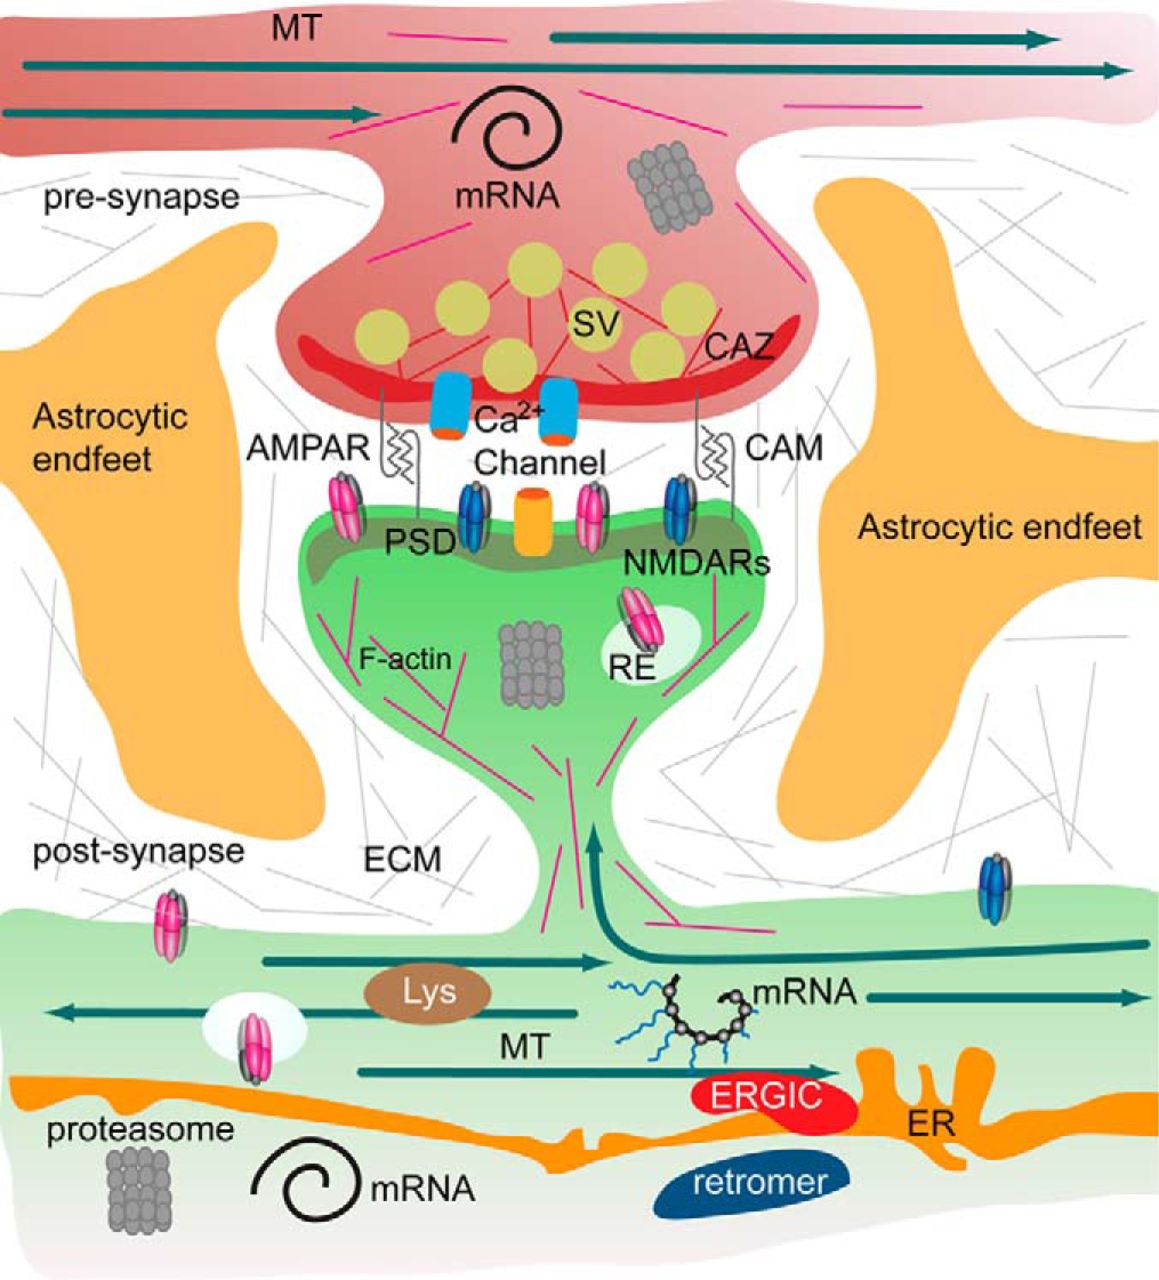 The tetrapartite synapse of principal neurons in the forebrain, consisting of the pre- and postsynaptic compartment, astrocytic endfeet, and the extracellular matrix has a tightly regulated protein composition. A microsceretory system is present in synapses and dendrites that allows for translation of mRNA, local synthesis of, processing and insertion of transmembrane proteins. Hence the turnover of the synaptic protein machinery is controlled by local and somatic de novo protein synthesis, protein degradation by the ubiquitin proteasome system, lysosomes and autophagosomes. In addition, the association of proteins with pre- and postsynaptic compartments is highly dynamic. Molecular machineries and organelles for proteostasis are shared between synapses in dendritic segments. Proteins are transported in and out of the synapse as well as by diffusion of transmembrane proteins. These processes govern the activity-dependent assembly of the pre- and postsynaptic scaffold and the synaptic surface expression of receptors, calcium channels and cell adhesion molecules. Abbreviations: CAM, cell adhesion molecules; CAZ, cytomatrix at the active zone; ECM, extracellular matrix; ER, endoplasmatic reticulum; ERGIC, endoplasmatic reticulum Golgi intermediate compartment; MT, microtubules; PSD, postsynaptic density; RE, recycling endosomes; Lys, lysomes; SV, synaptic vesicle. From Proteomics of the Synapse – A Quantitative Approach to Neuronal Plasticity Daniela C. Dieterich, Michael R. Kreutz Molecular & Cellular Proteomics February 1, 2016, First published on August 25, 2015, 15 (2) 368-381; DOI: 10.1074/mcp.R115.051482